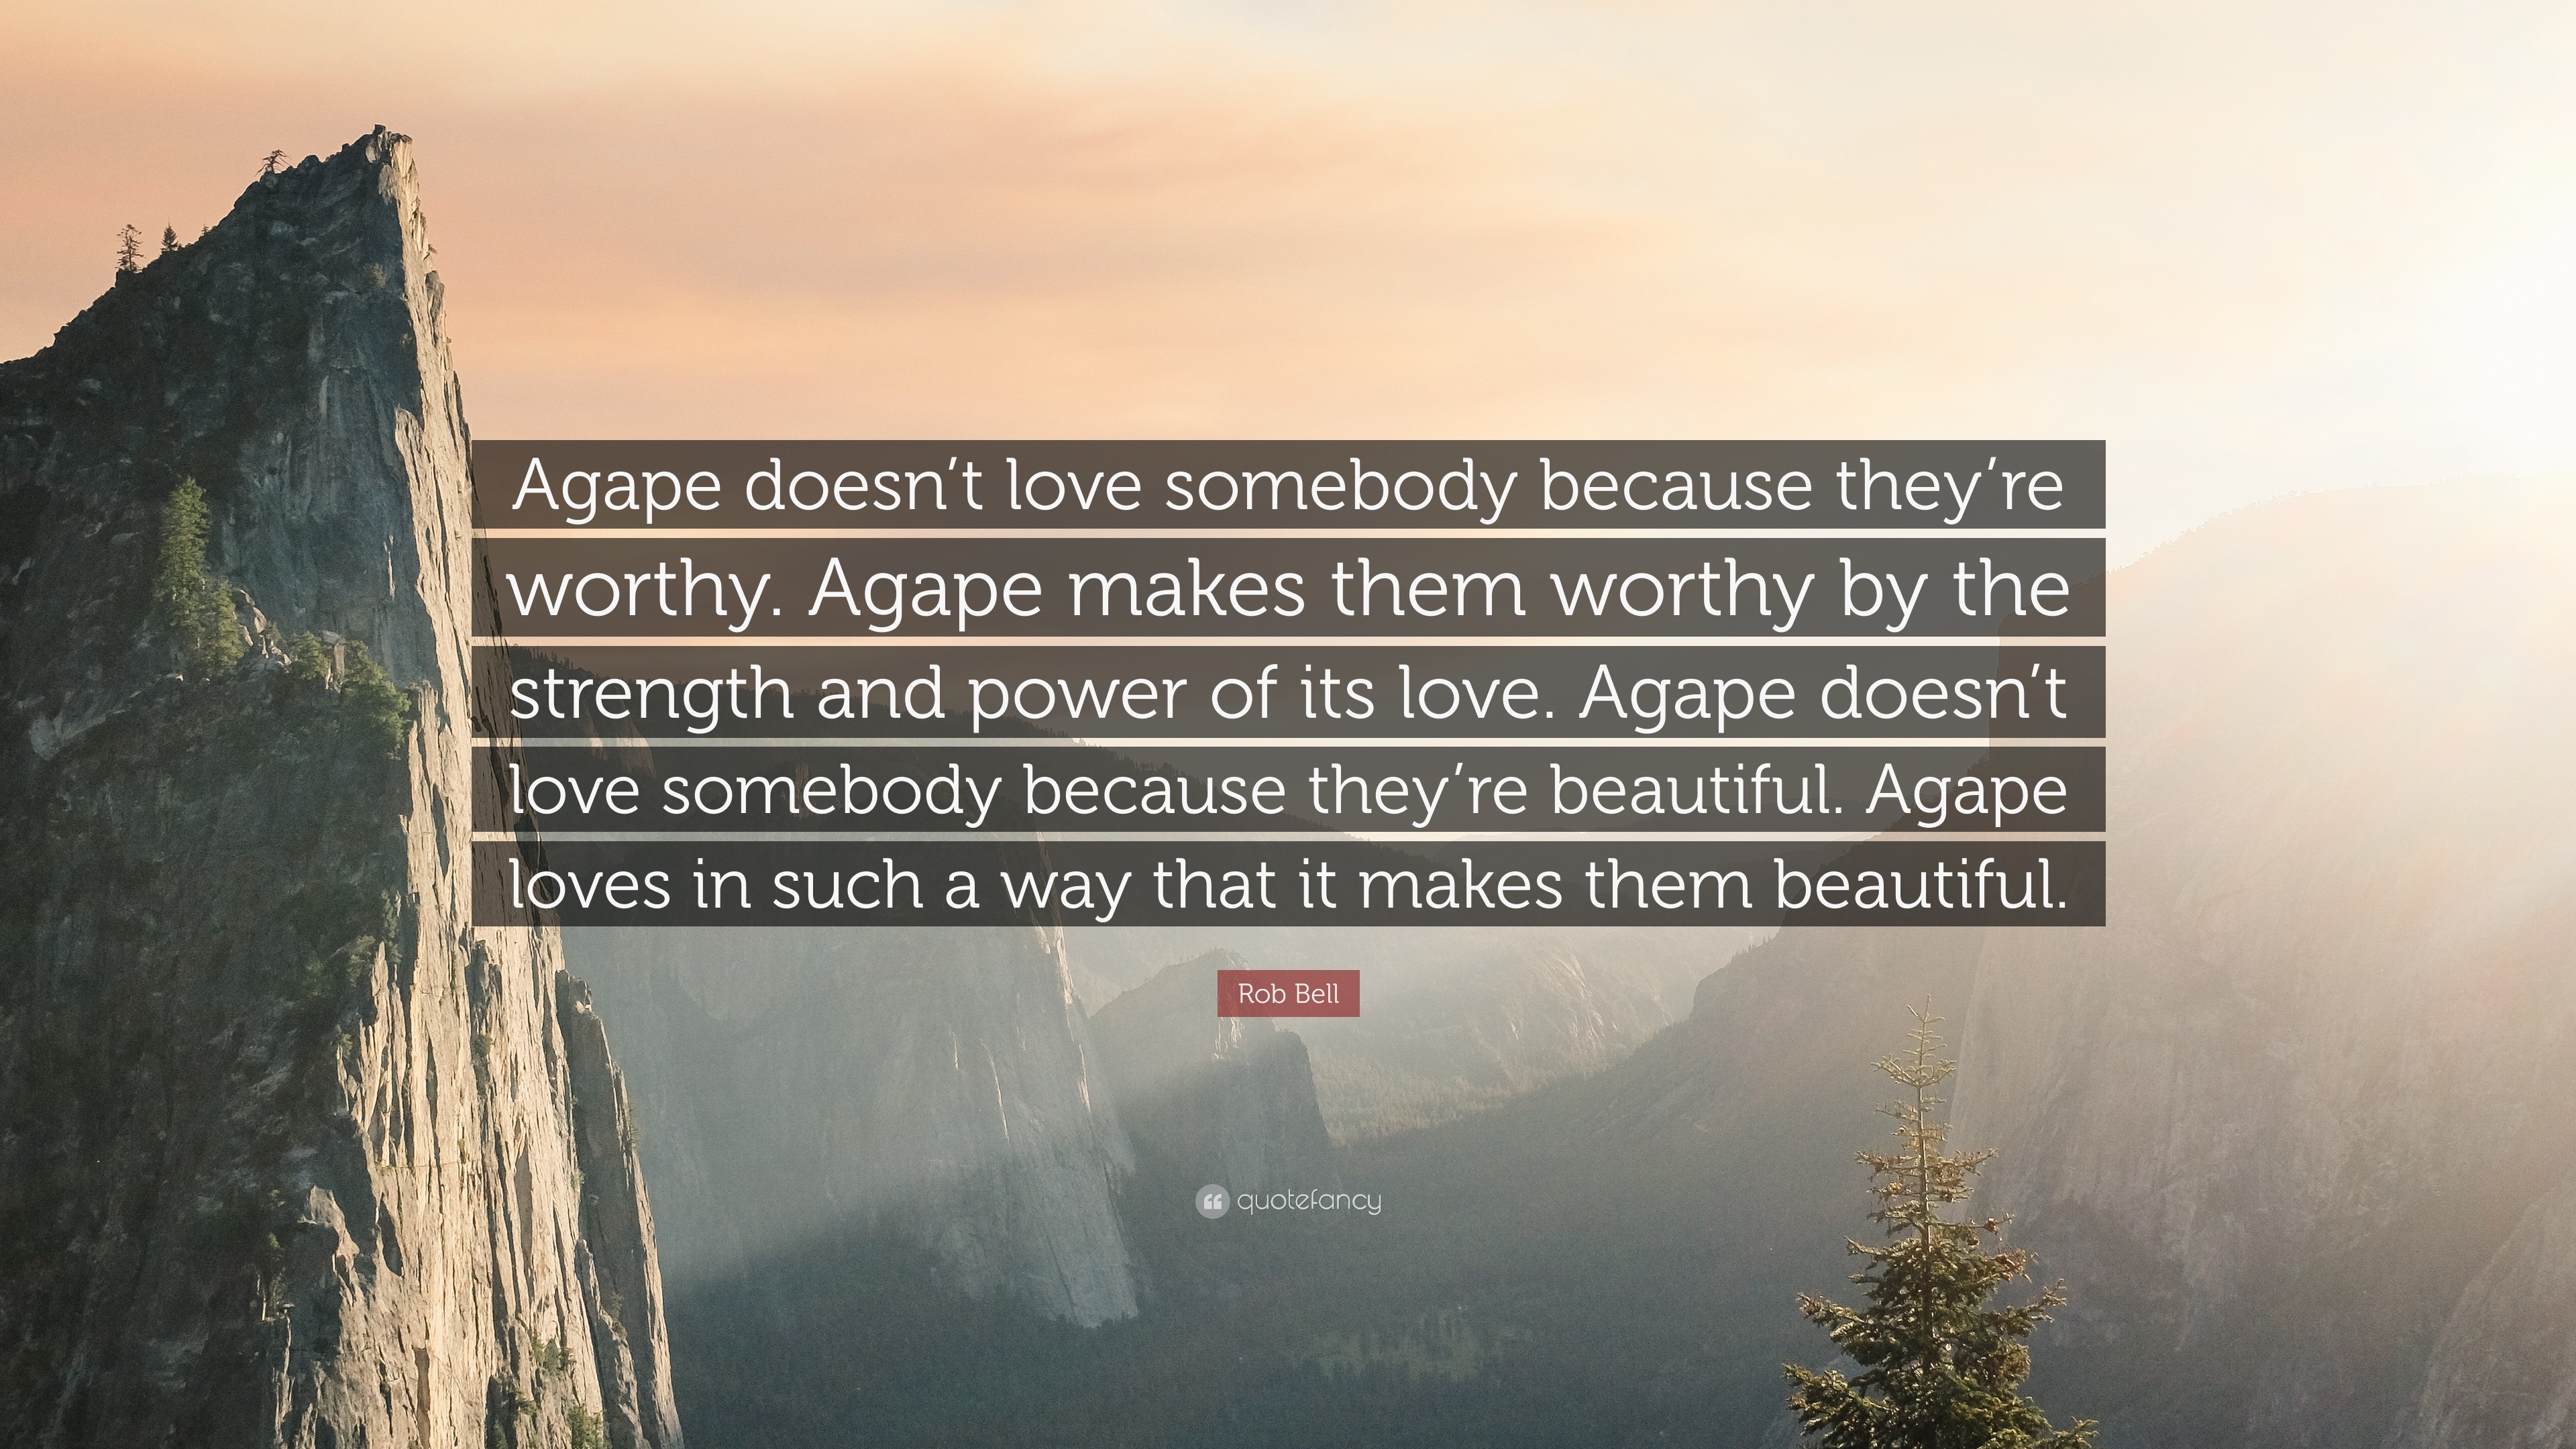 374279-Rob-Bell-Quote-Agape-doesn-t-love-somebody-because-they-re-worthy.jpg